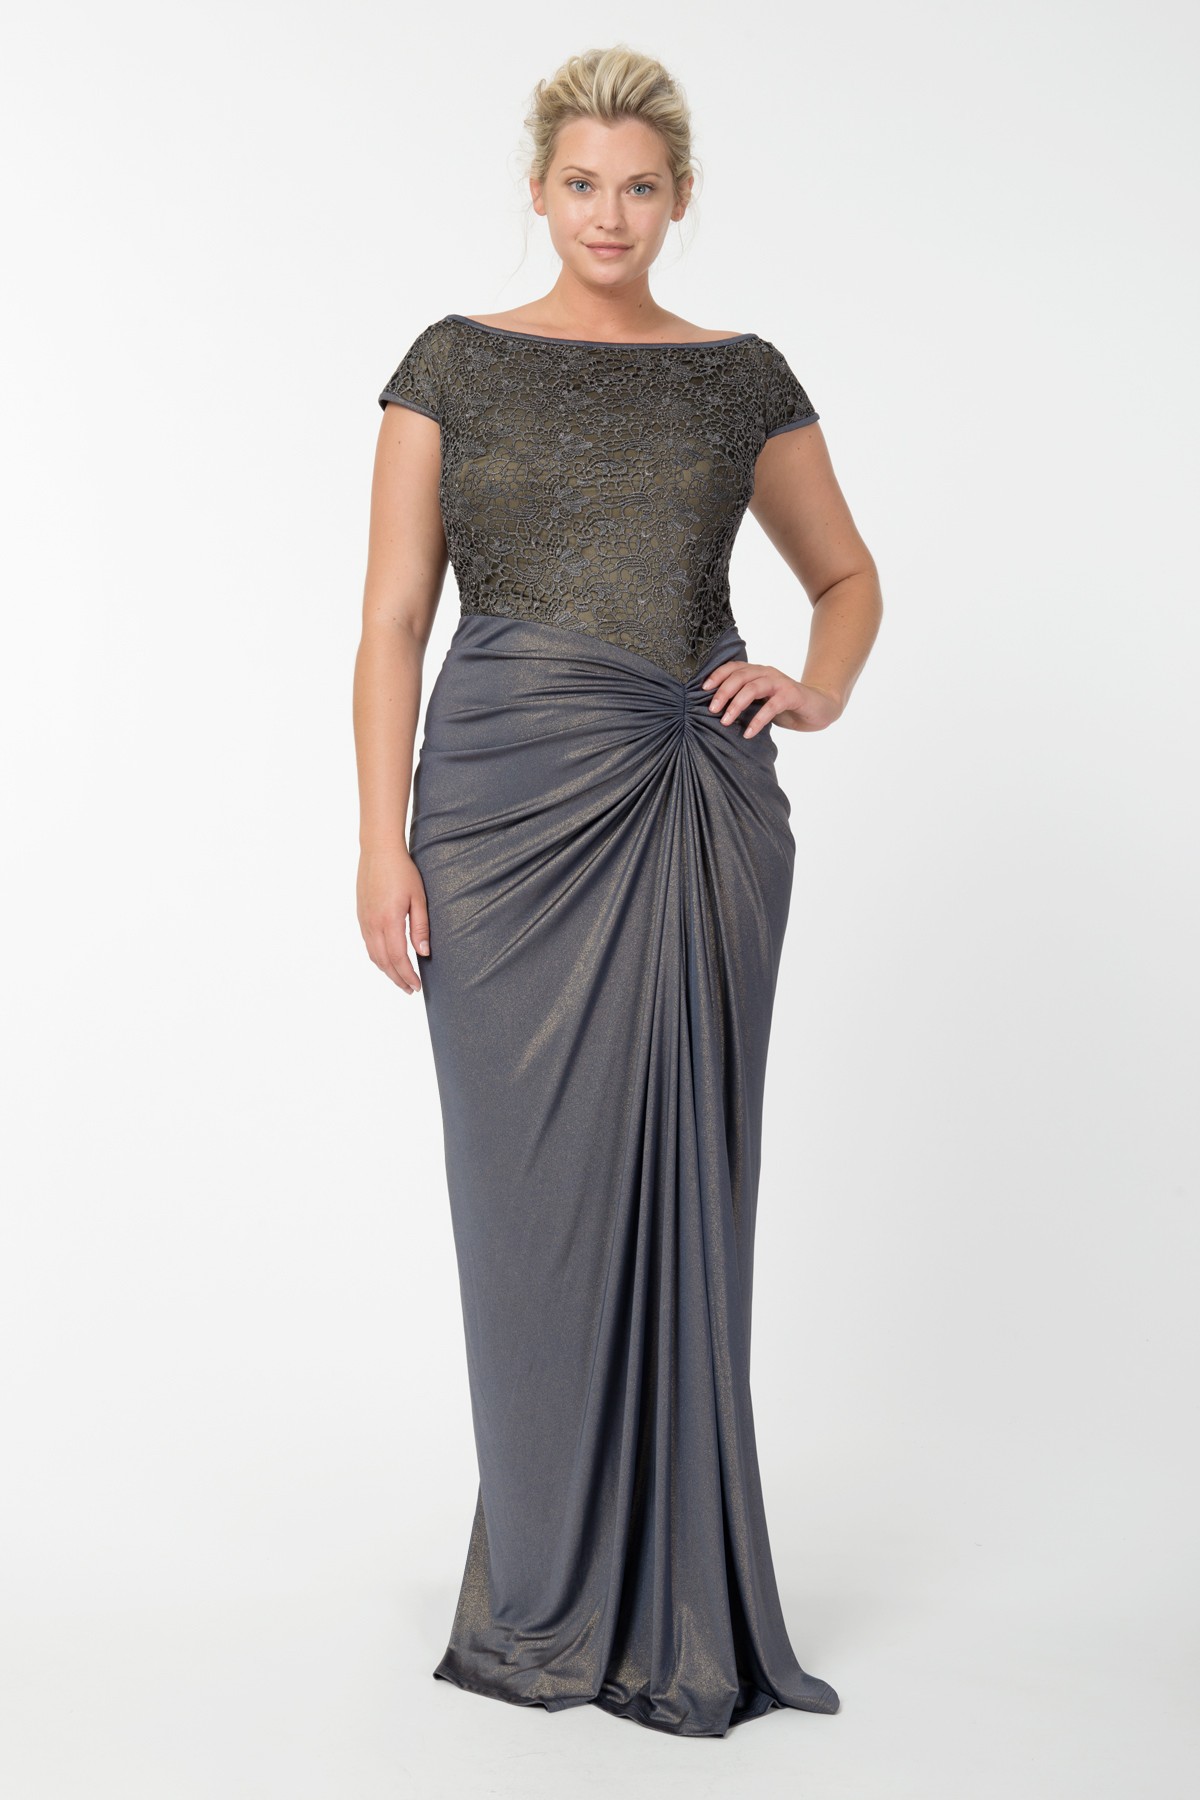 Plus Size Formal Dresses And Gowns